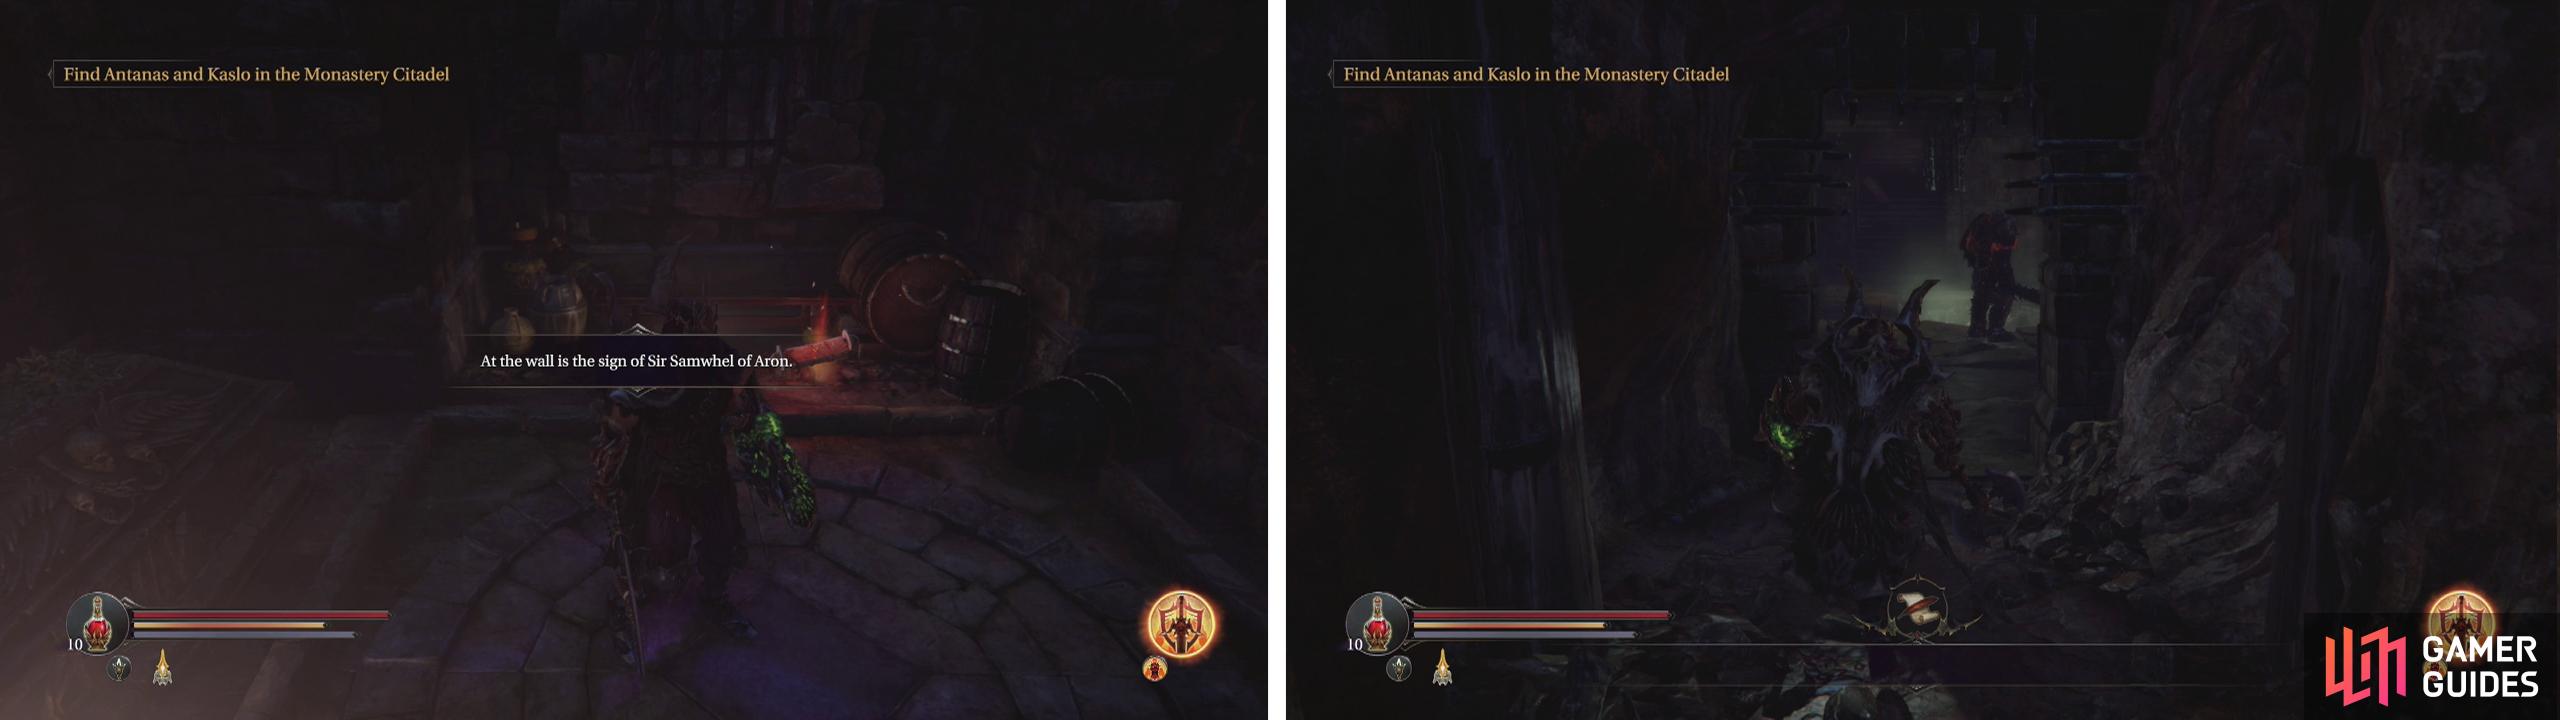 Enter the wooden door near the lever (left) for a Lever Handle item. Use this to open the Infected Monk's cell and kill him (right) to complete the side-quest.